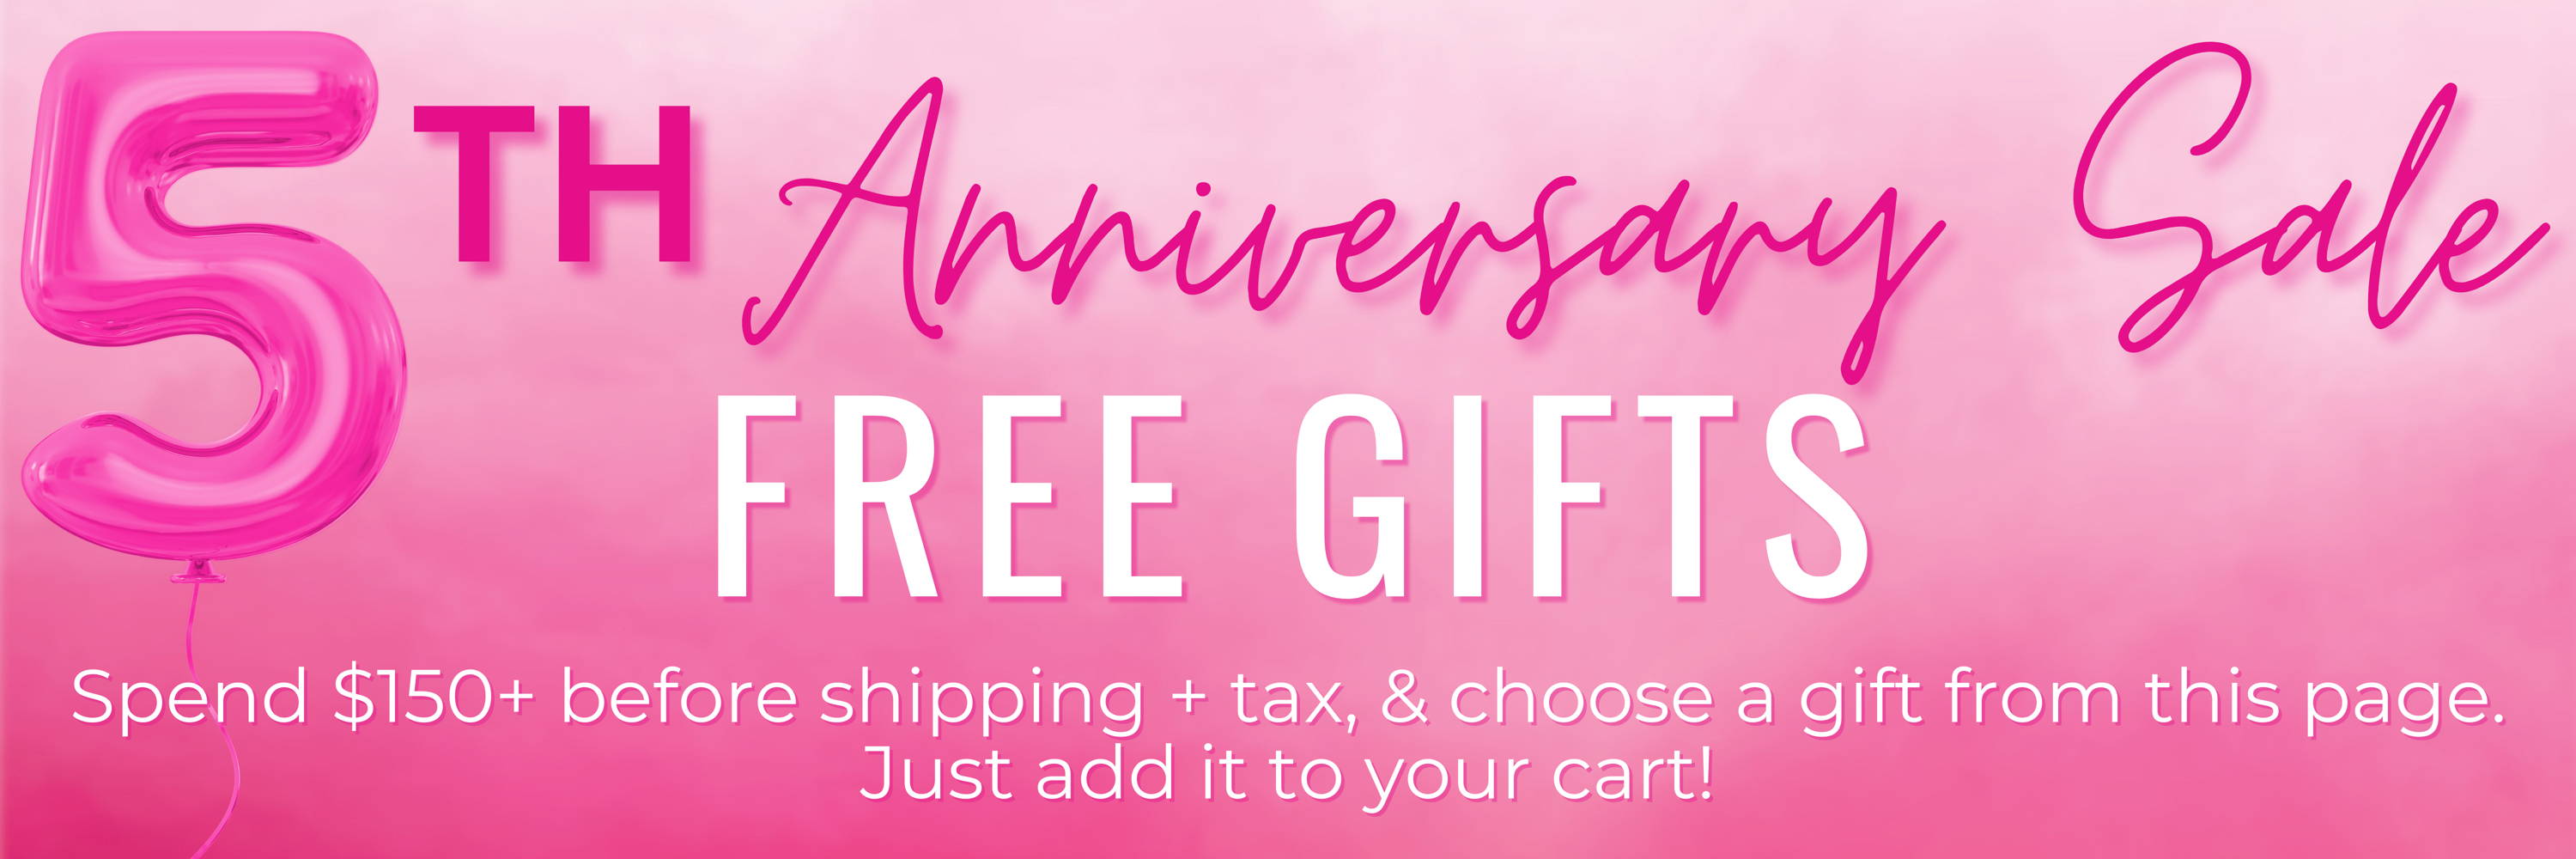 Free Gifts for orders over $150